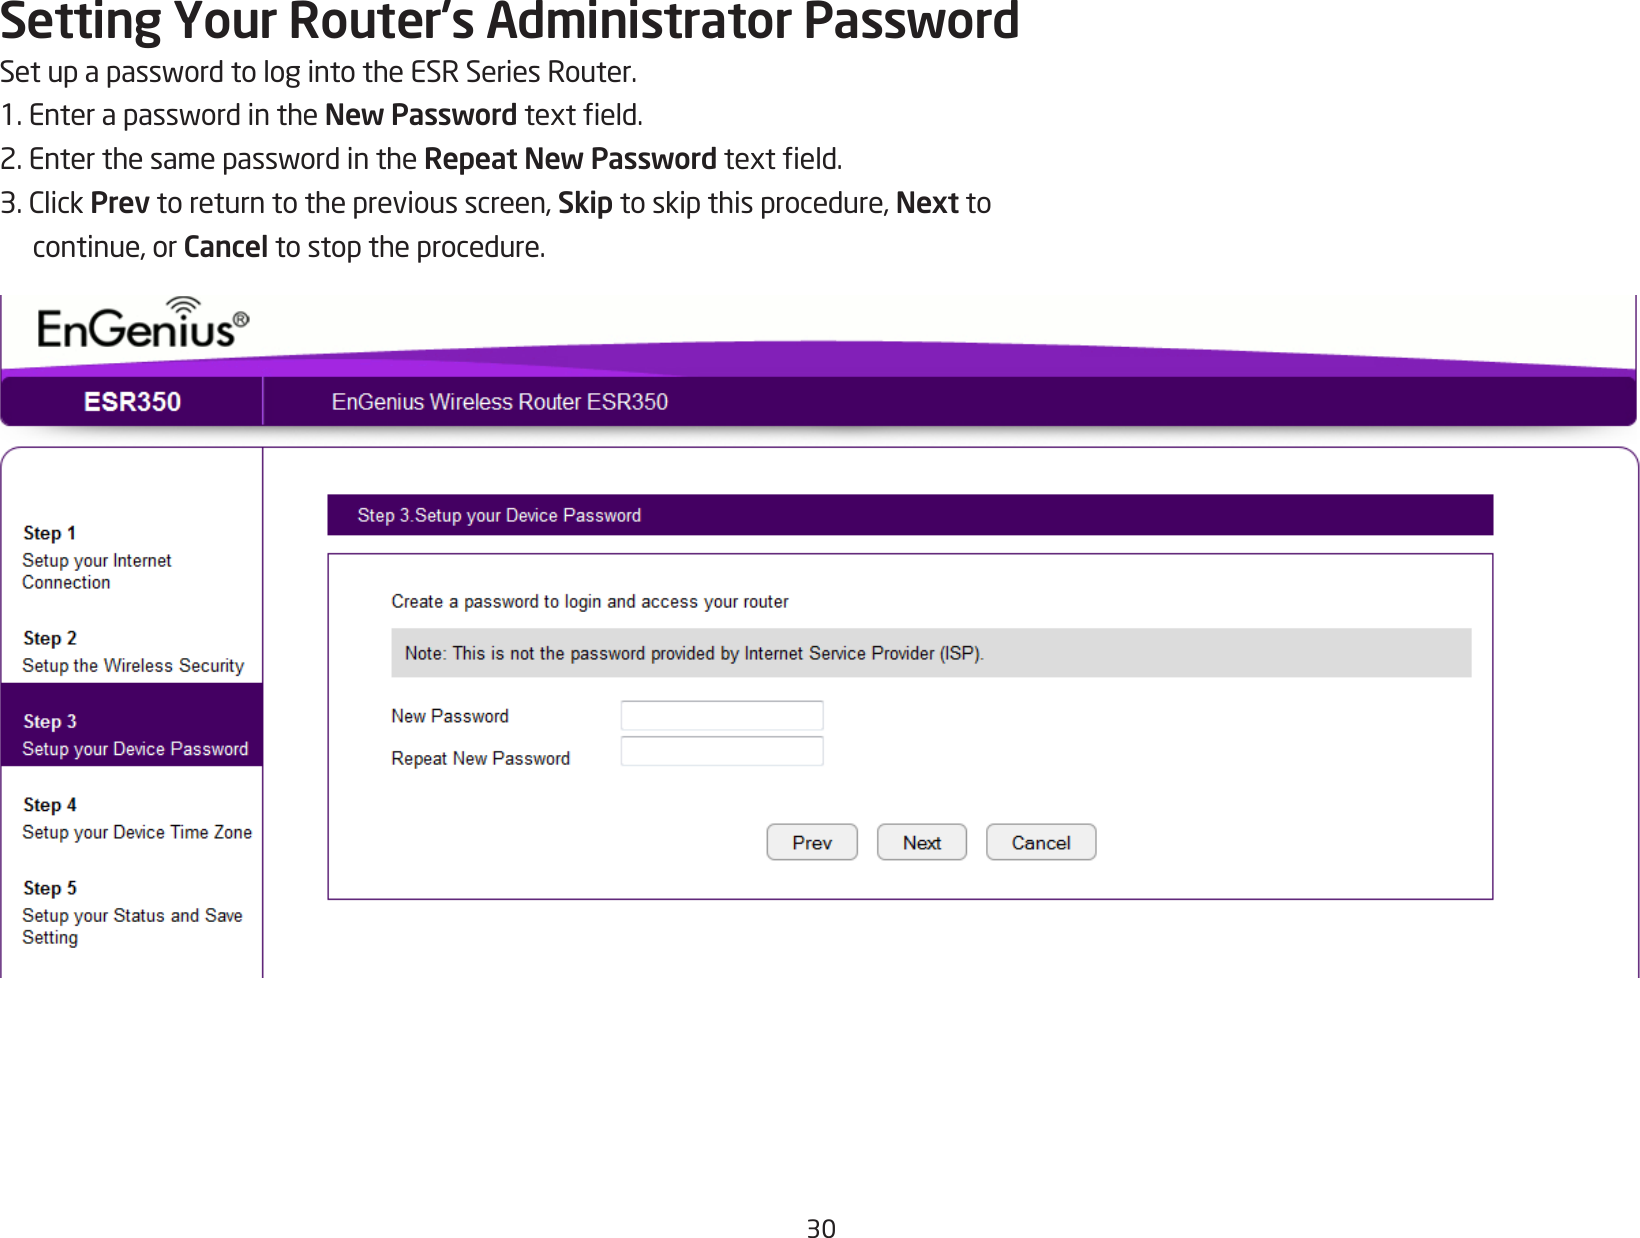 30Setting Your Router’s Administrator PasswordSetupapasswordtologintotheESRSeriesRouter.1.EnterapasswordintheNew Passwordtexteld.2.EnterthesamepasswordintheRepeat New Passwordtexteld.3.ClickPrev to return to the previous screen, Skip to skip this procedure, Next to continue, or Cancel to stop the procedure.